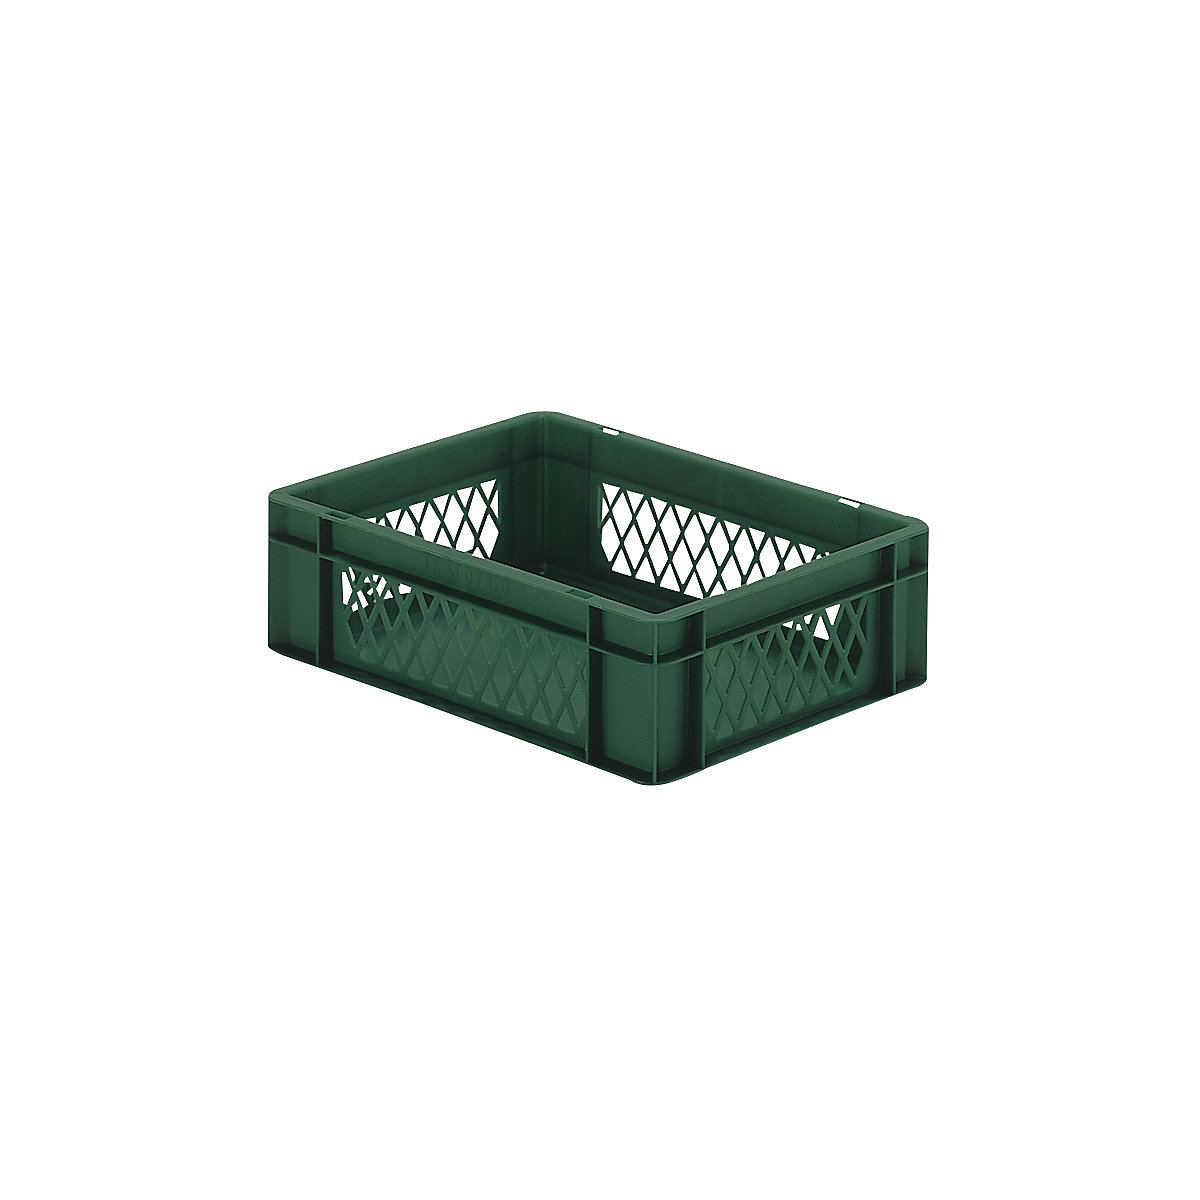 Euro stacking container, perforated walls, closed base, LxWxH 400 x 300 x 120 mm, green, pack of 5